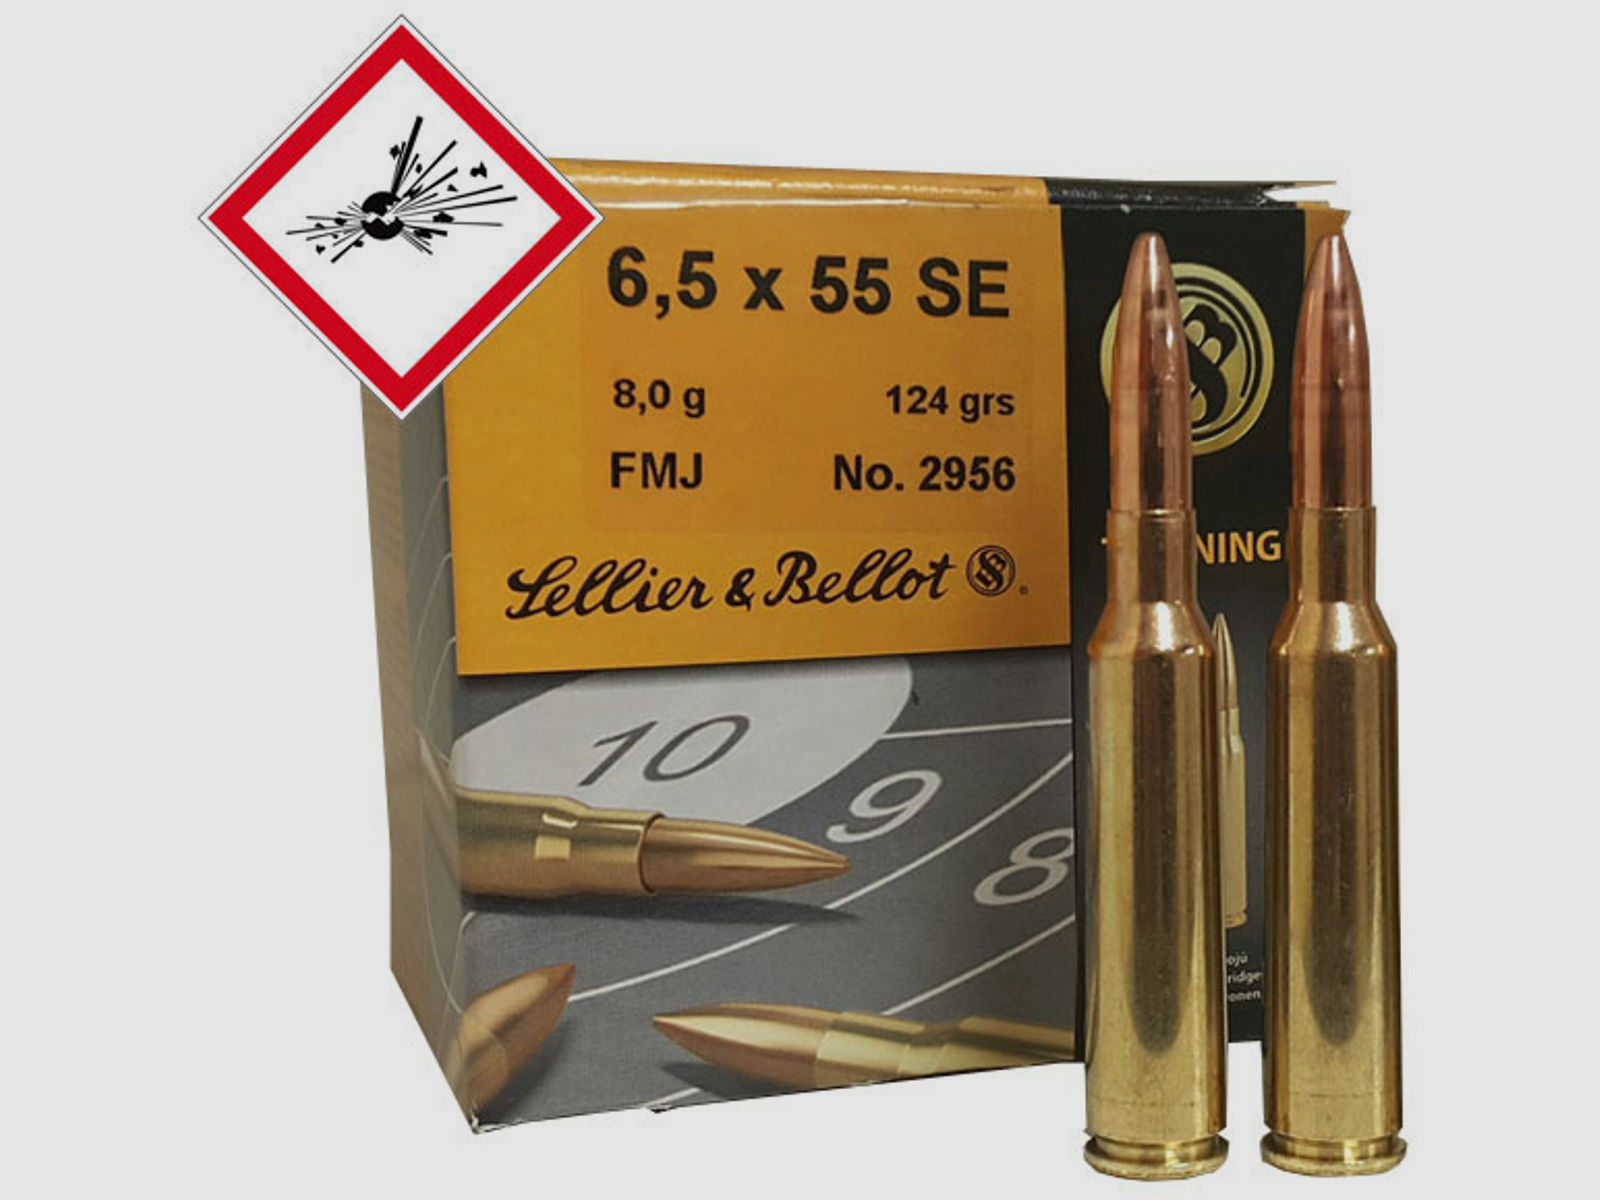 Sellier & Bellot 6,5X55 FMJ 124 grs